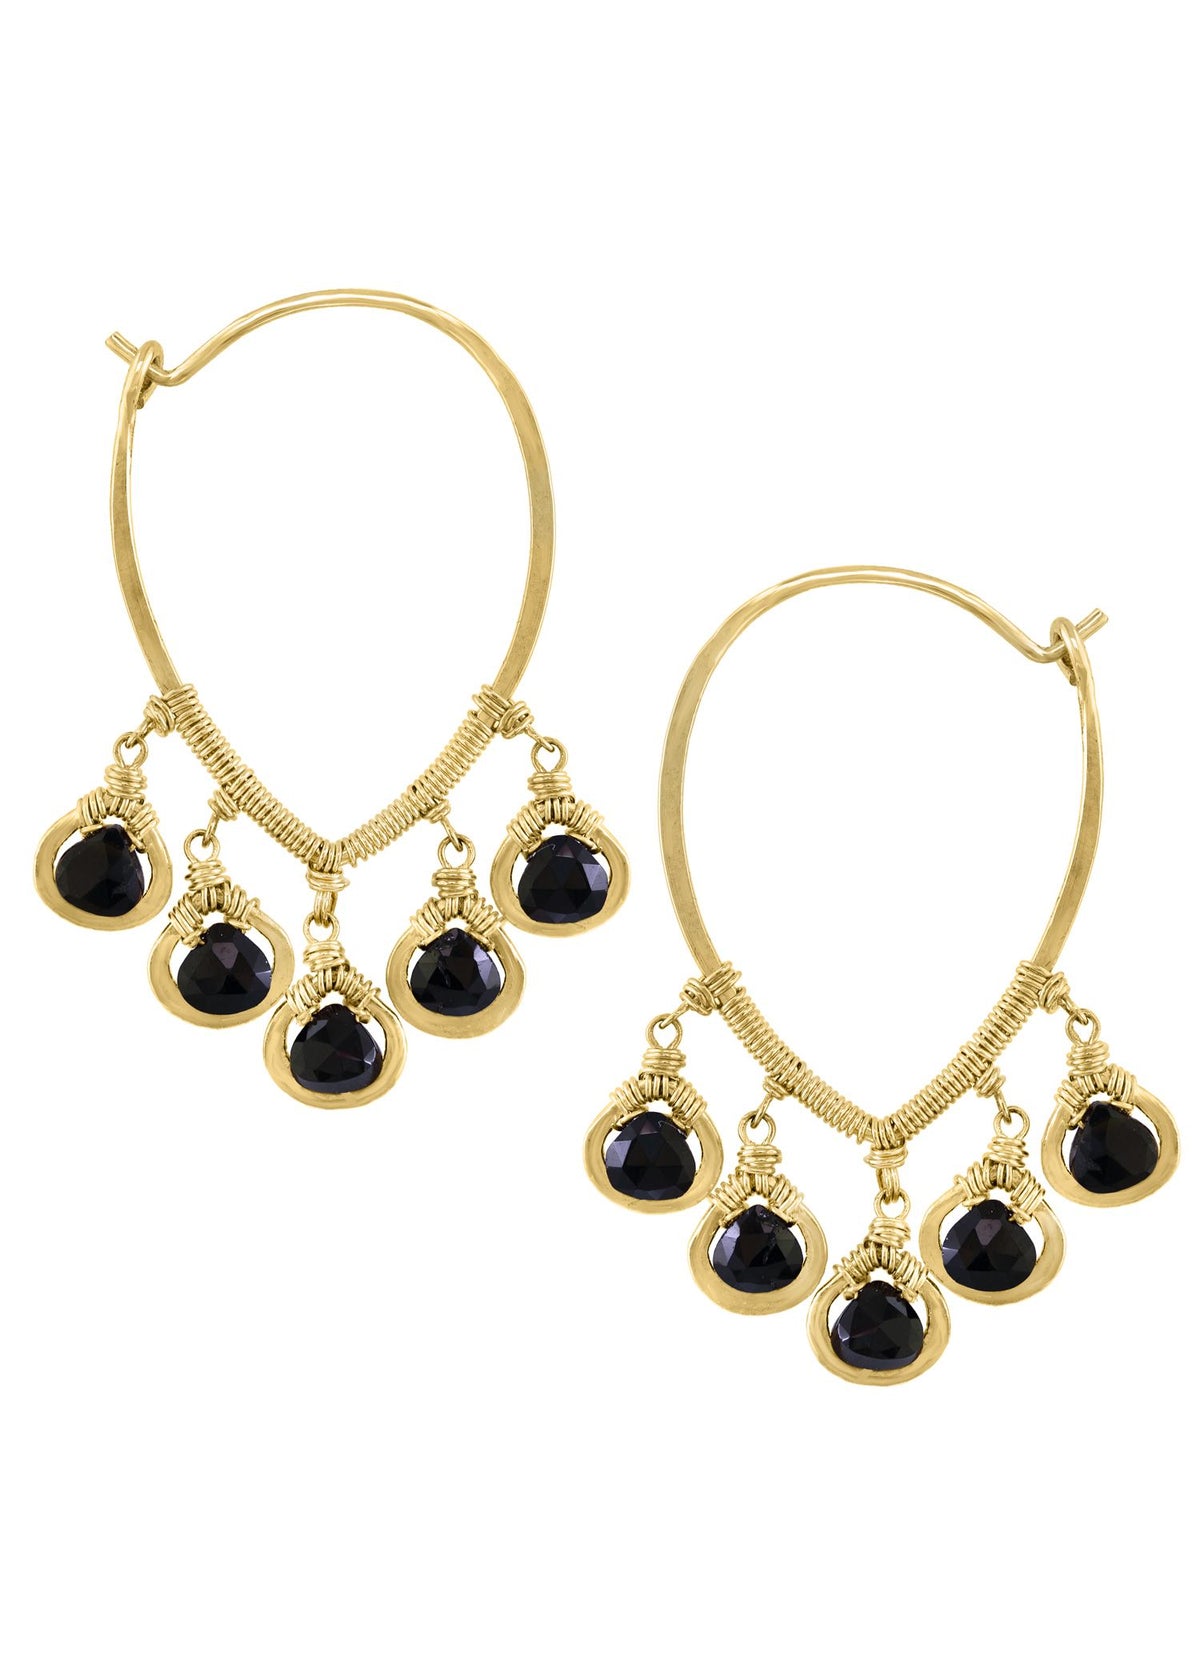 Black spinel 14k gold fill Earrings measure 1-7/16&quot; in length and 1-1/16&quot; in width Handmade in our Los Angeles studio